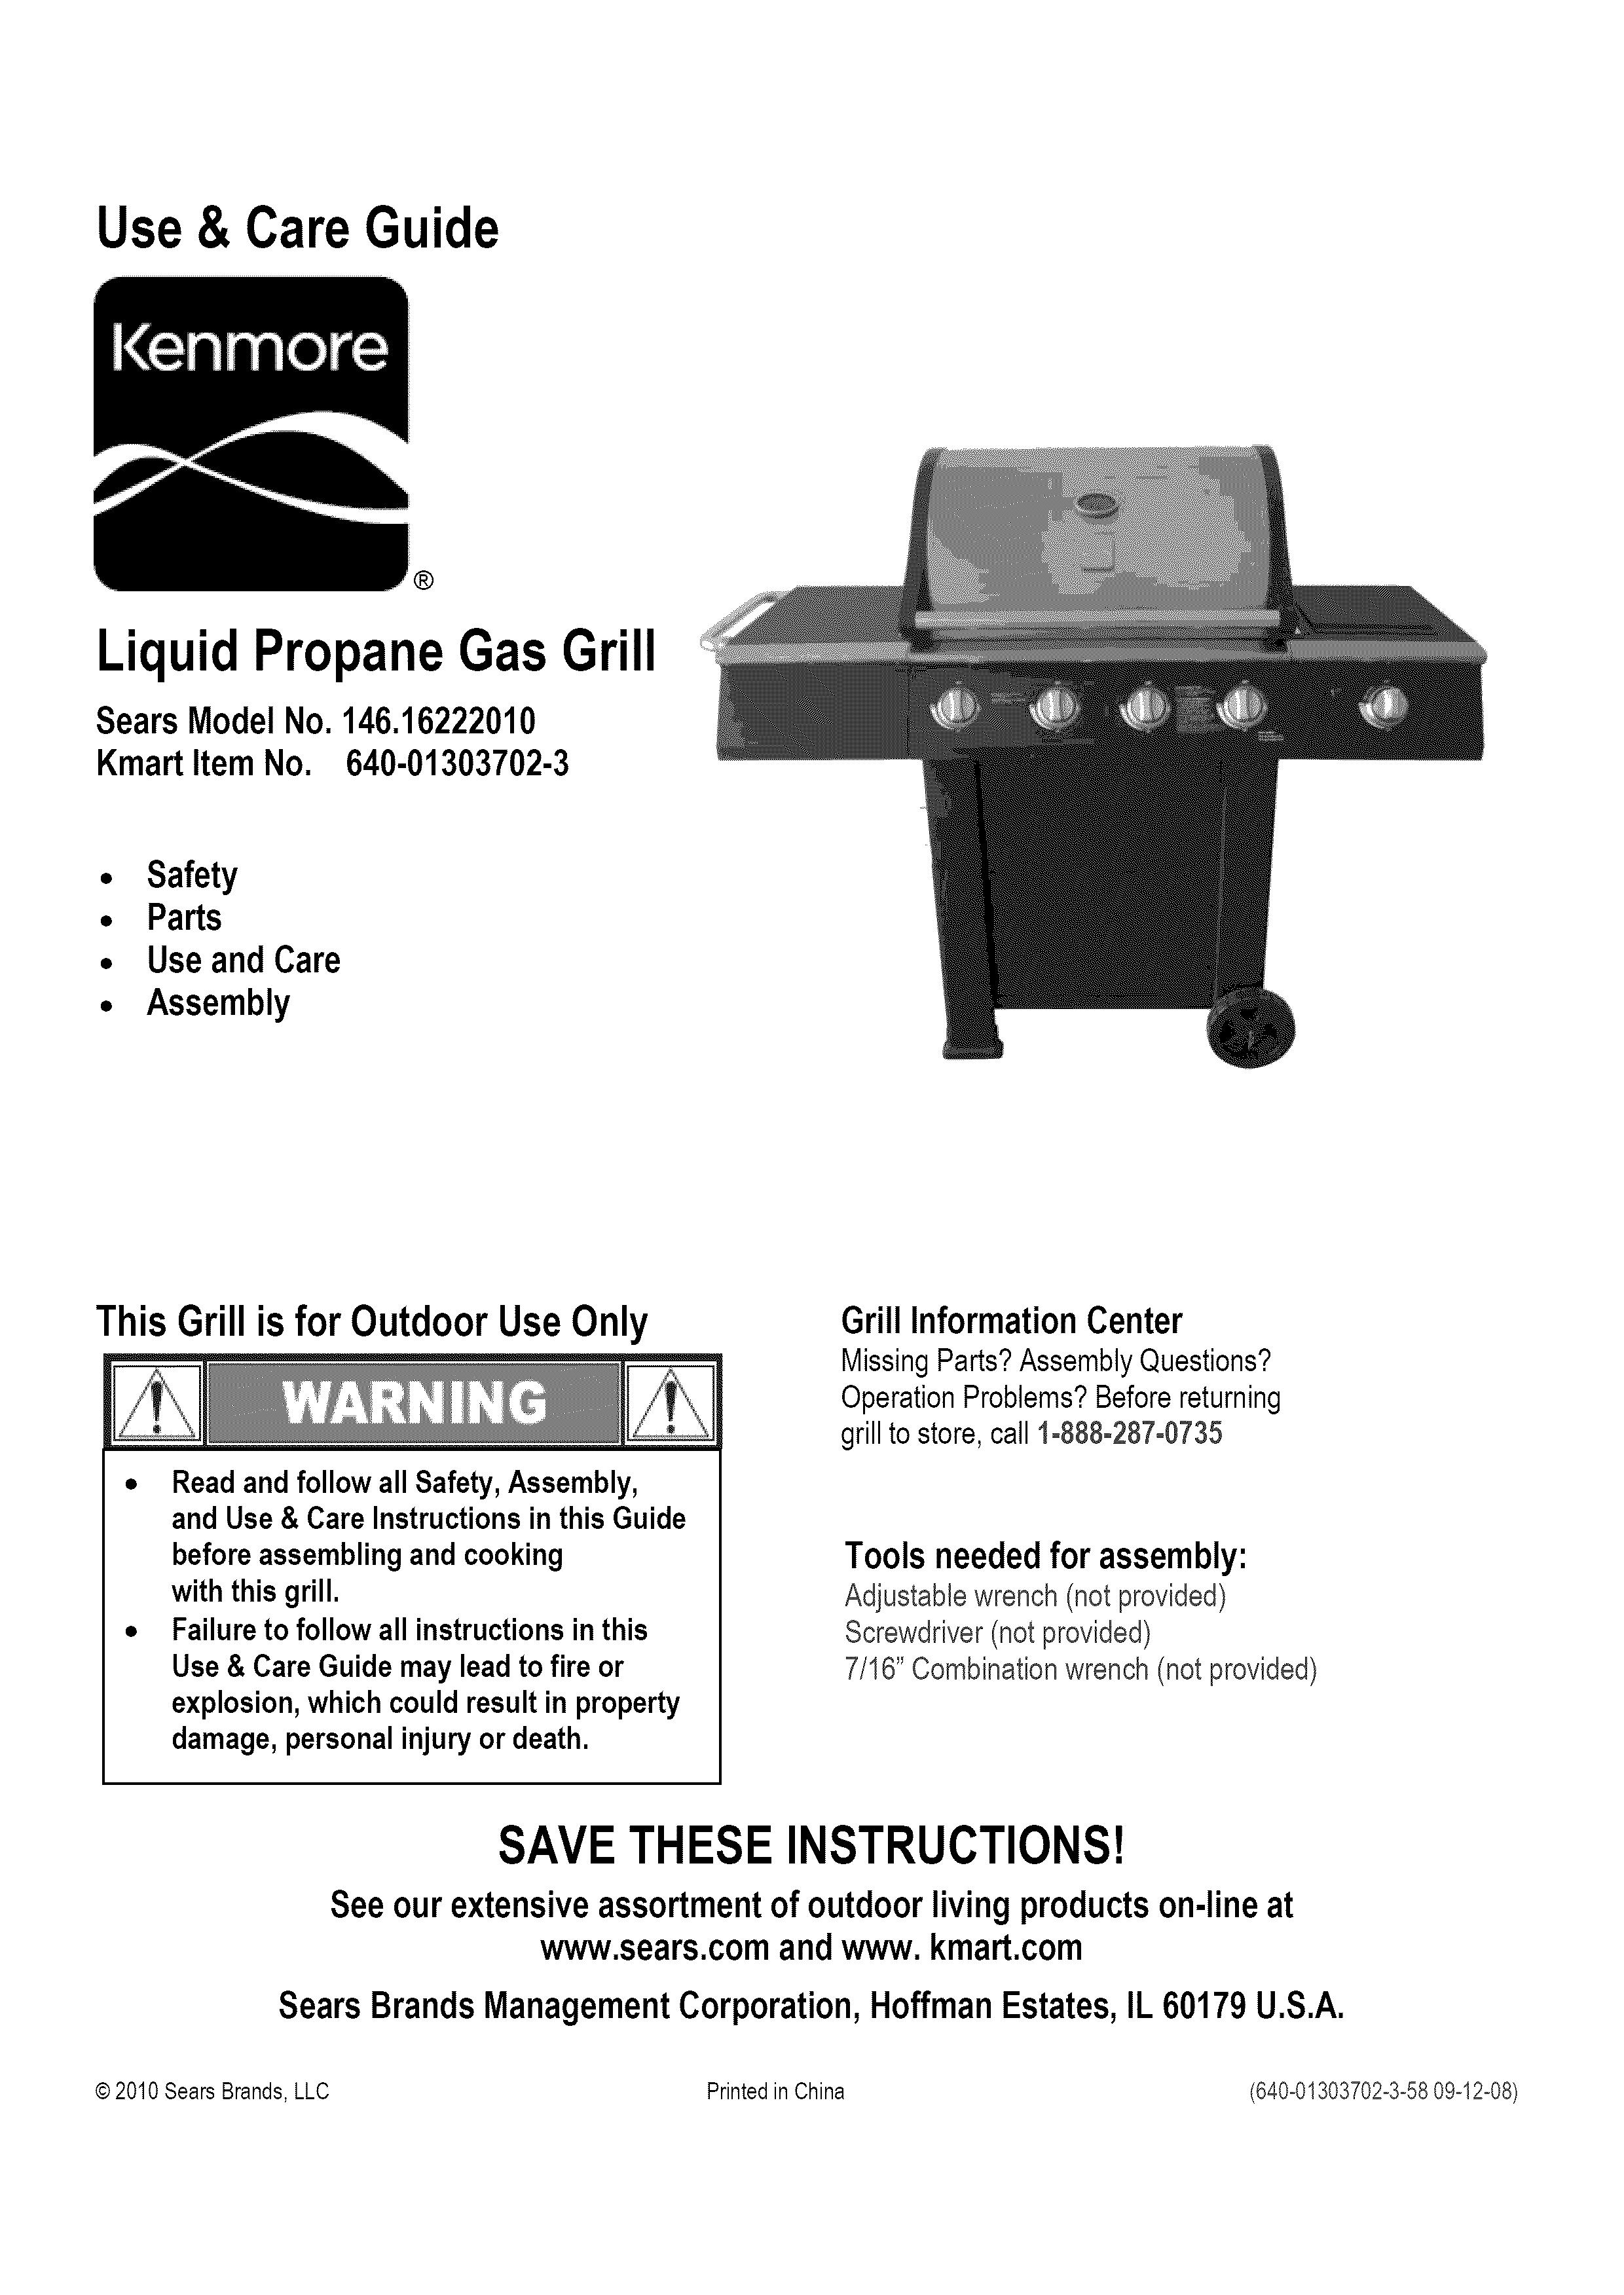 Kenmore 146.1622201 Gas Grill User Manual (Page 1)